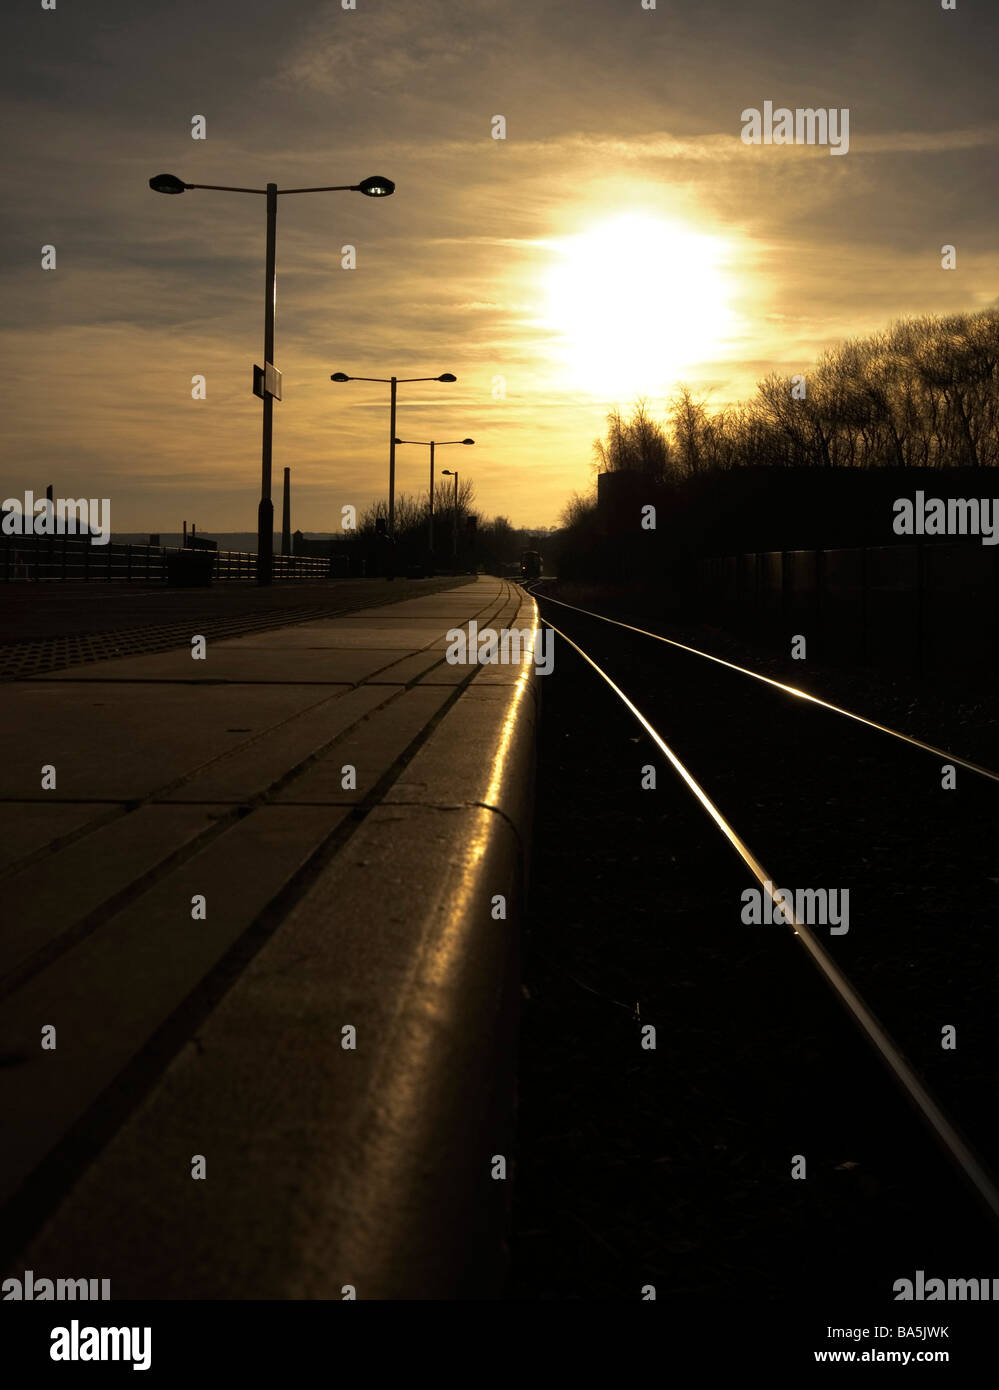 Looking along a railway station platform into the setting sun Stock Photo